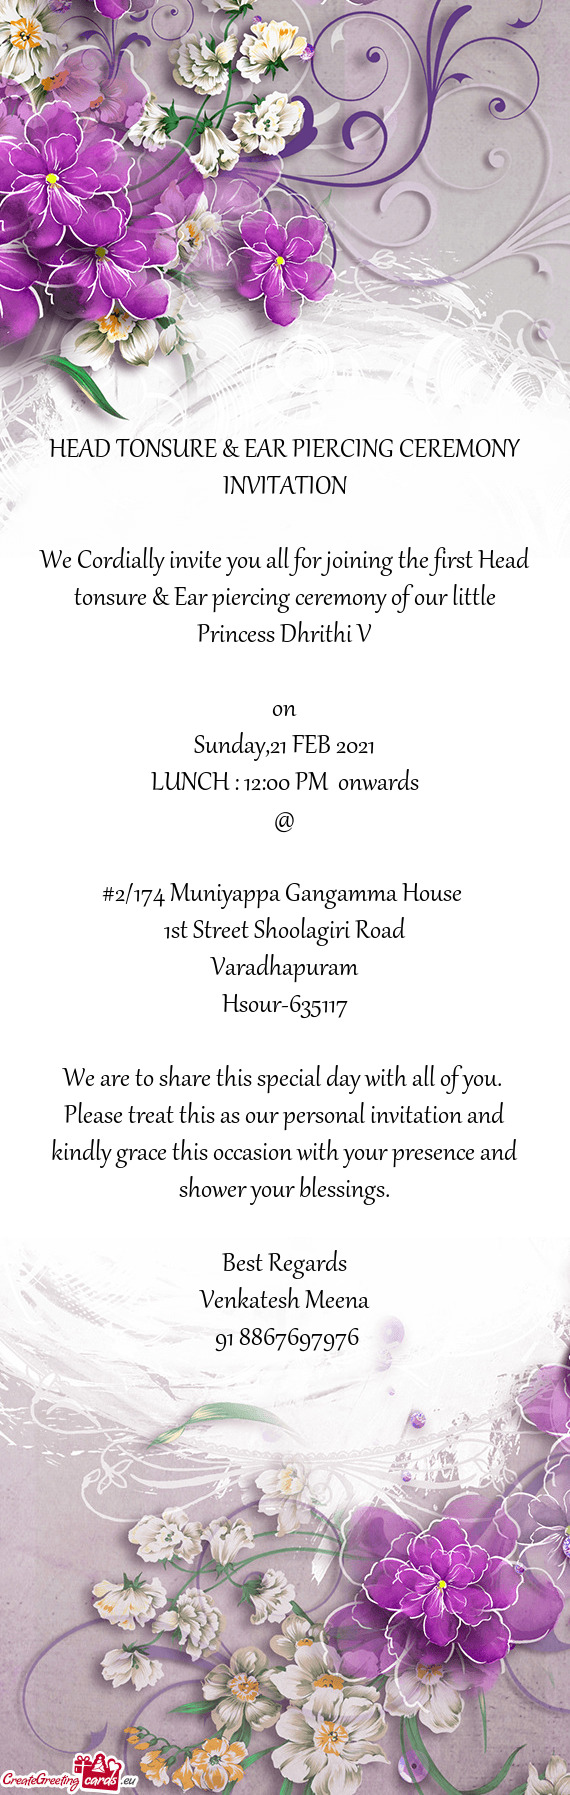 LUNCH : 12:00 PM onwards